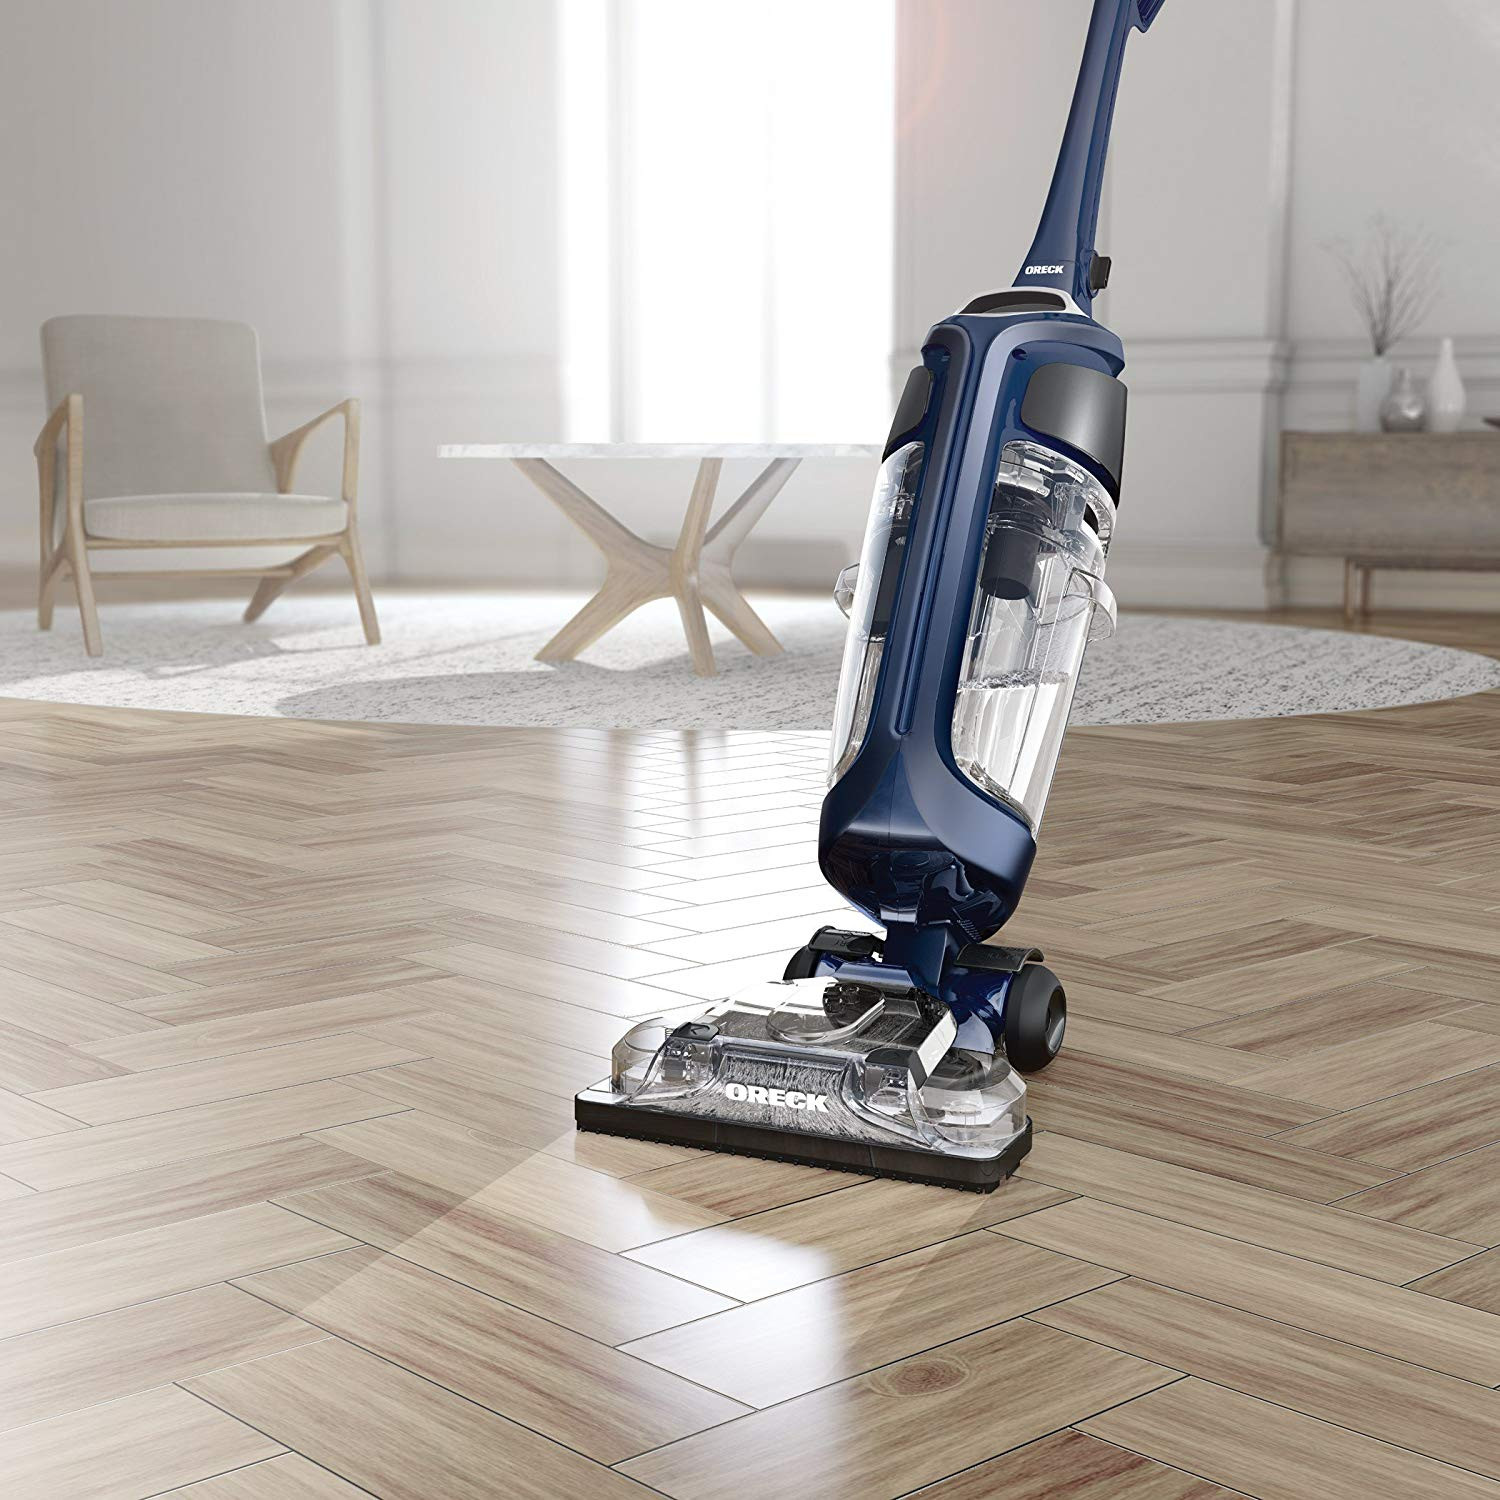 10 Amazing Zep Commercial Hardwood Laminate Floor Cleaner Reviews 2024 free download zep commercial hardwood laminate floor cleaner reviews of amazon com oreck surface scrub hard floor cleaner corded home pertaining to amazon com oreck surface scrub hard floor cleaner corded